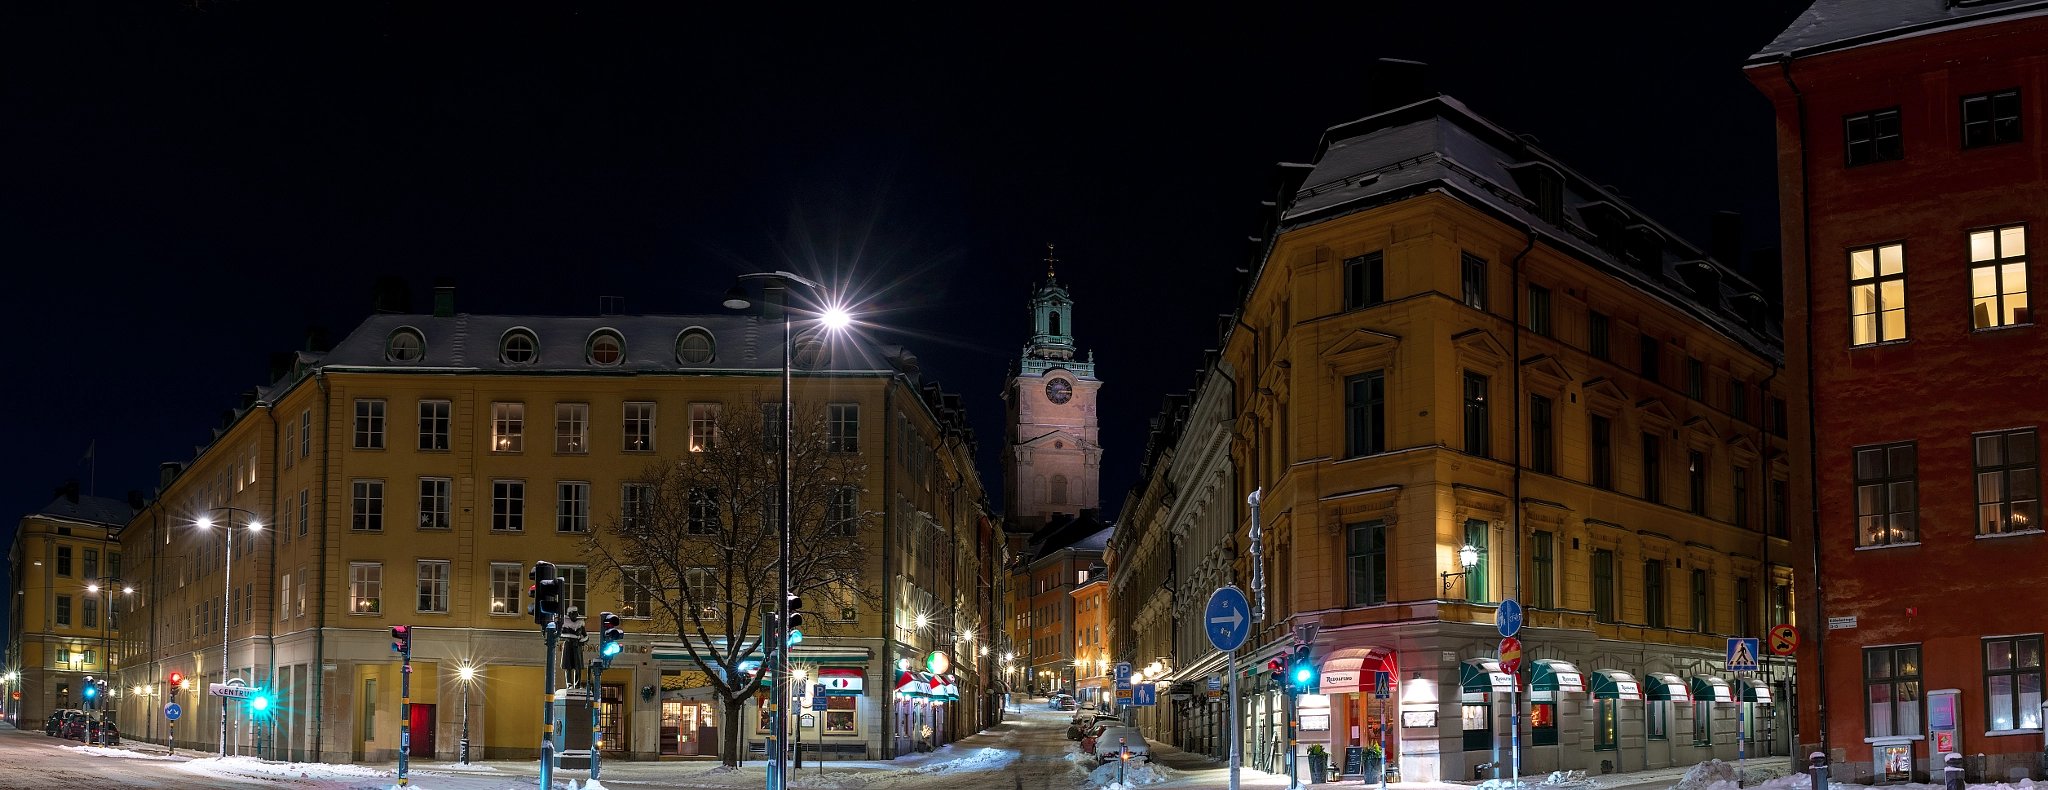 Sony a7R II sample photo. Stockholm city photography